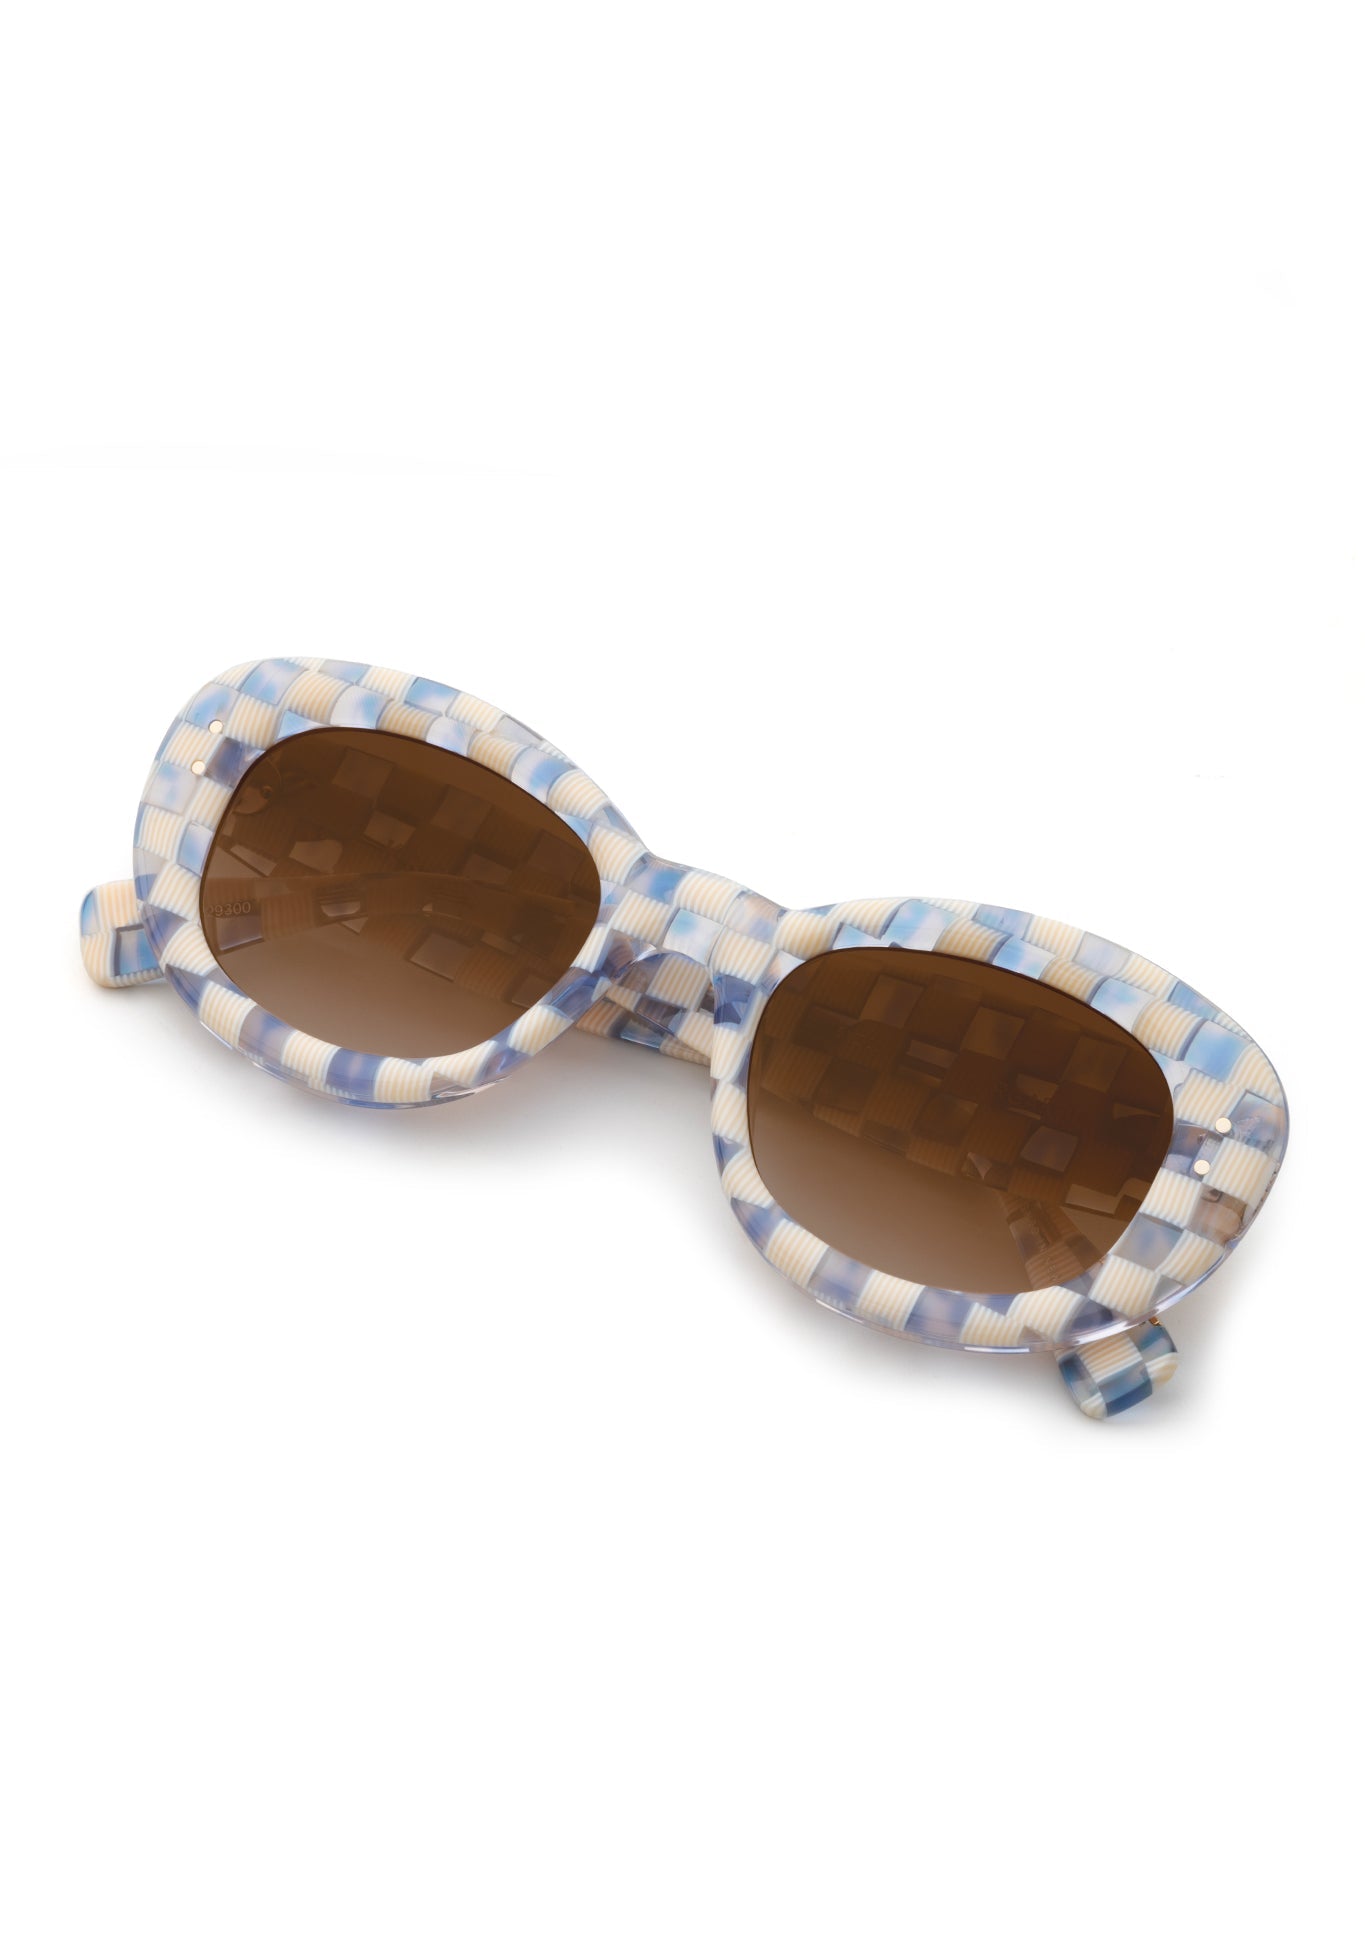 MARGARET | Gingham over Crystal Handcrafted, luxury blue and white checkered gingham acetate medium sized oval bubble frame KREWE sunglasses